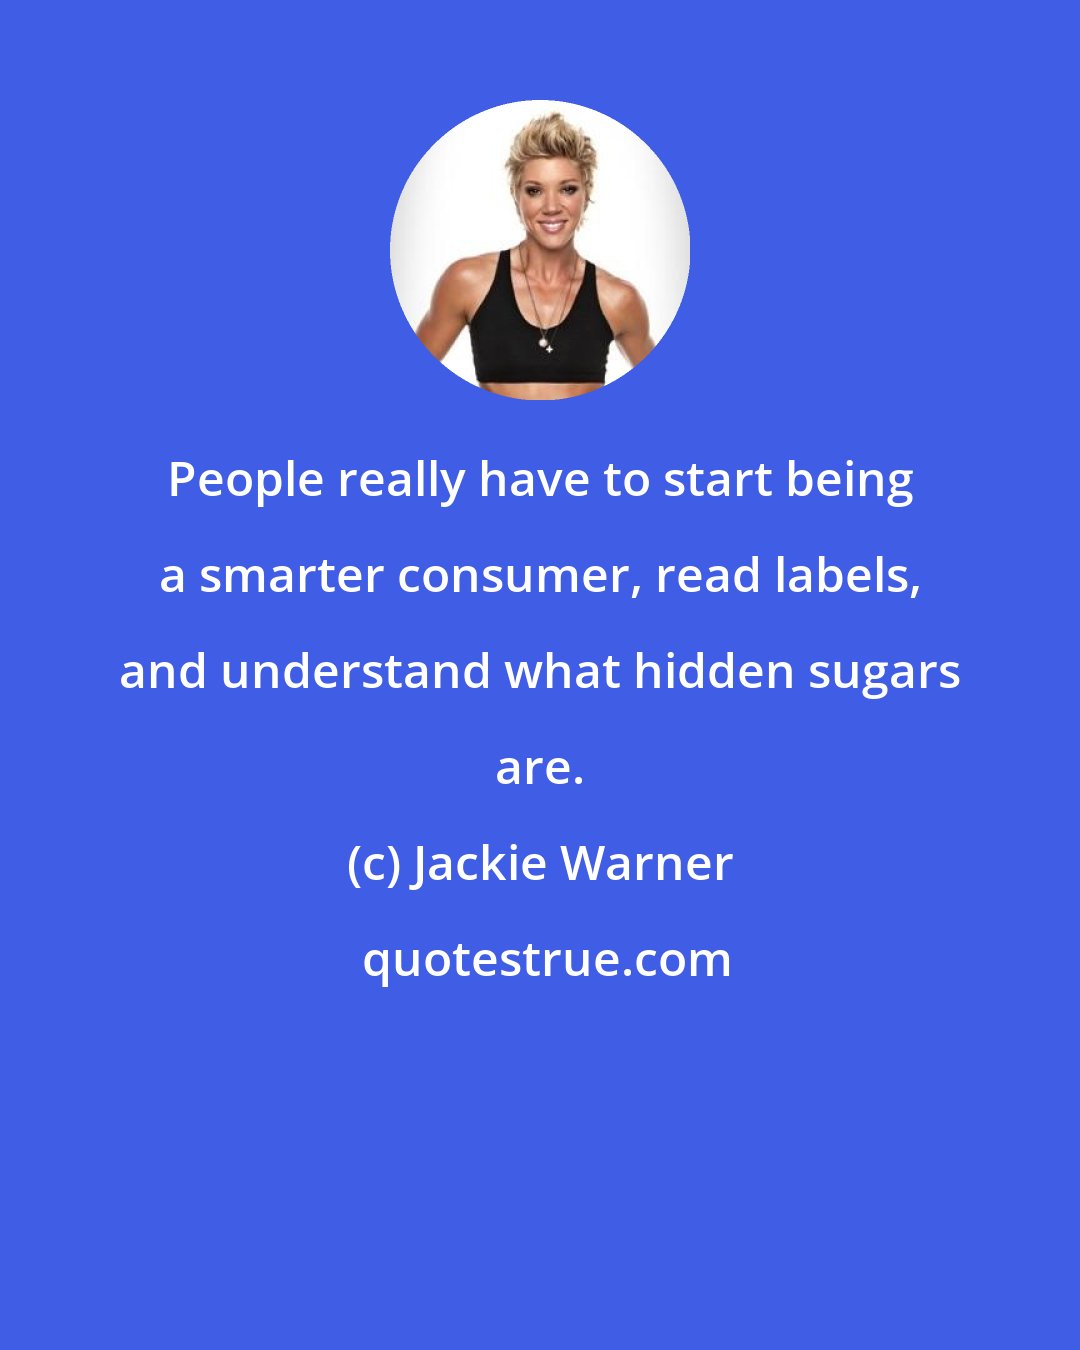 Jackie Warner: People really have to start being a smarter consumer, read labels, and understand what hidden sugars are.